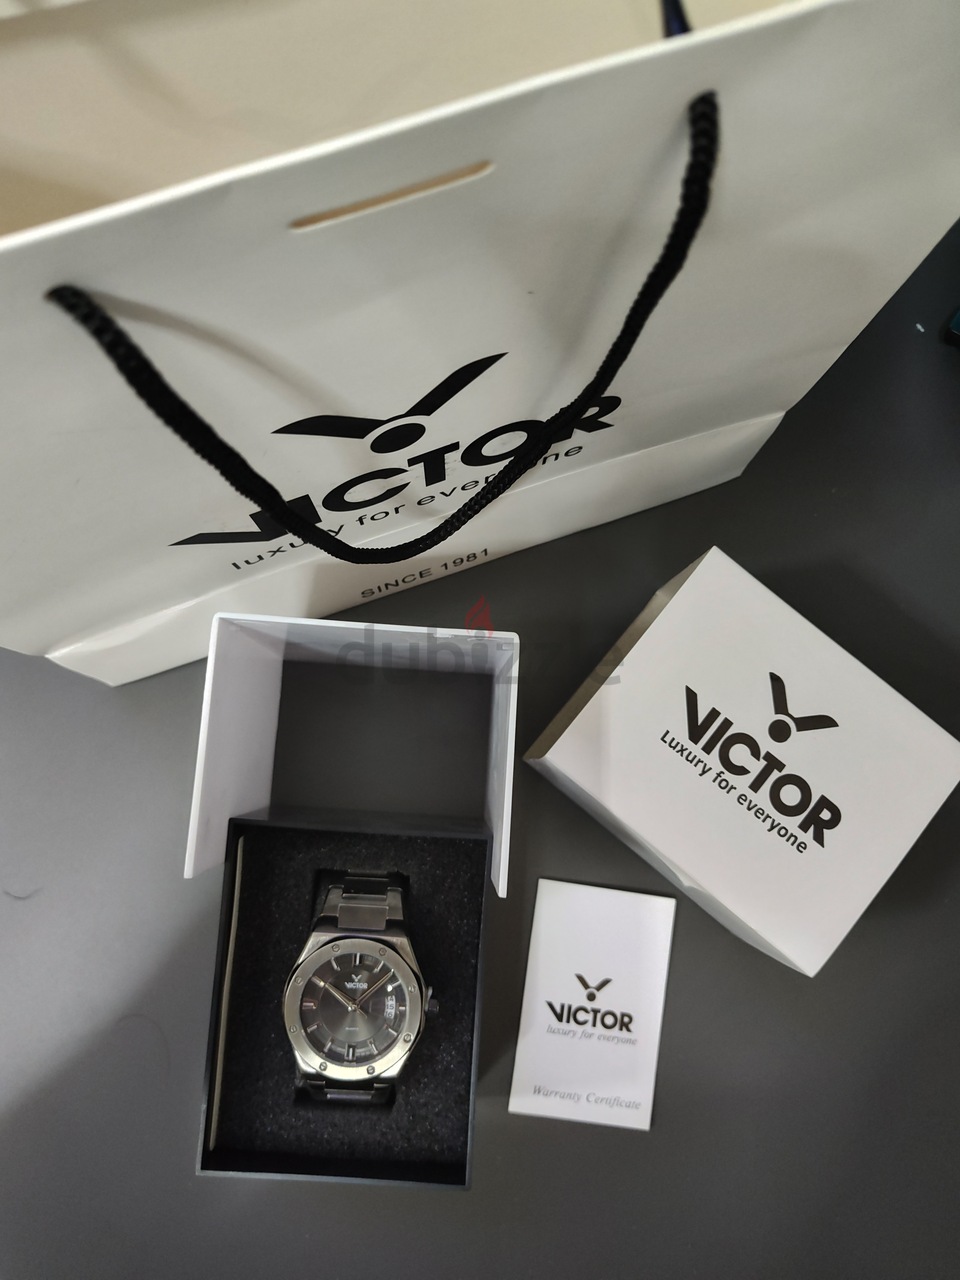 Victor watches for men V1345-3: Buy Online at Best Price in UAE - Amazon.ae